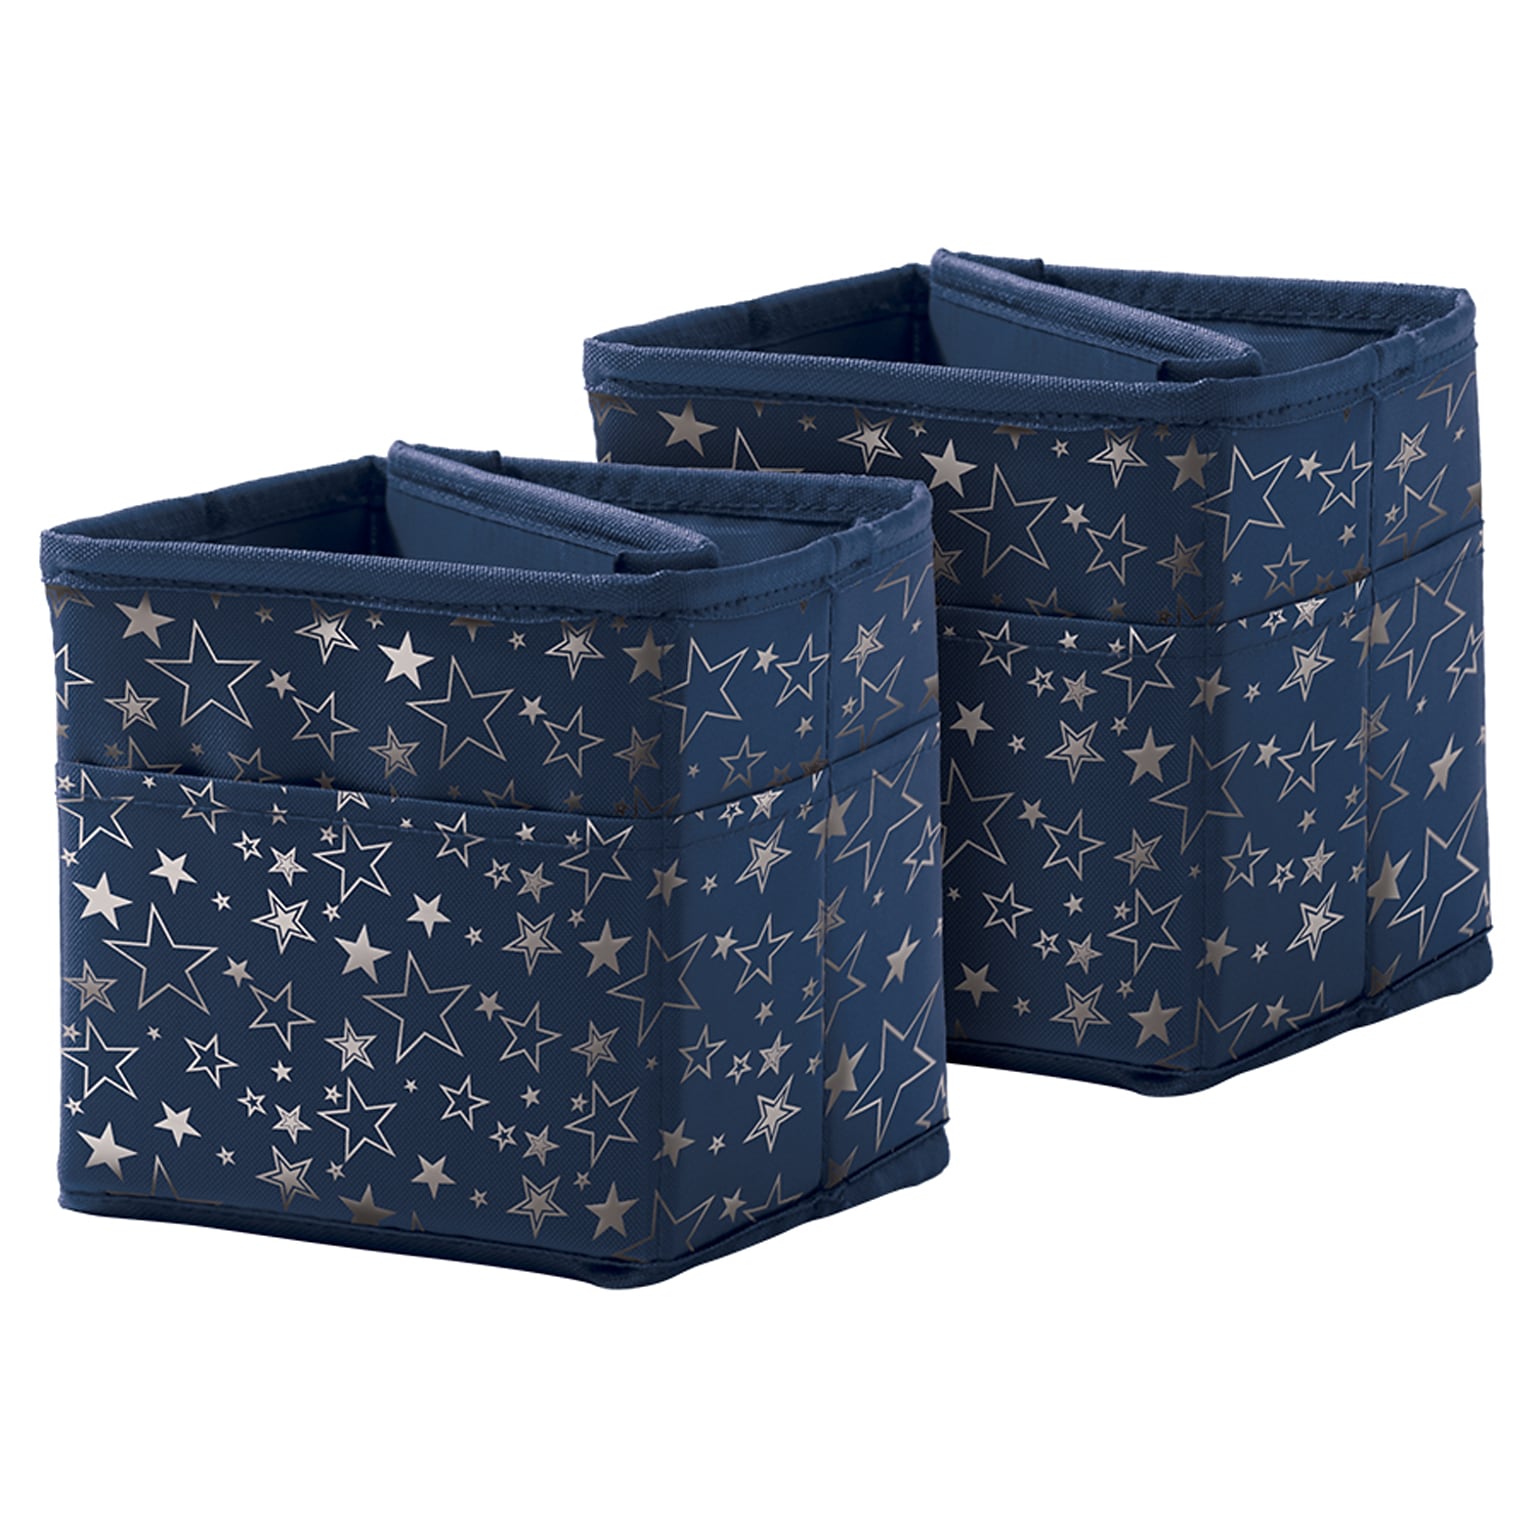 Carson Dellosa Education Polyester Tabletop Storage Cube, 5.25 x 5.25, Navy with Silver Stars, Pack of 2 (CD-158185)